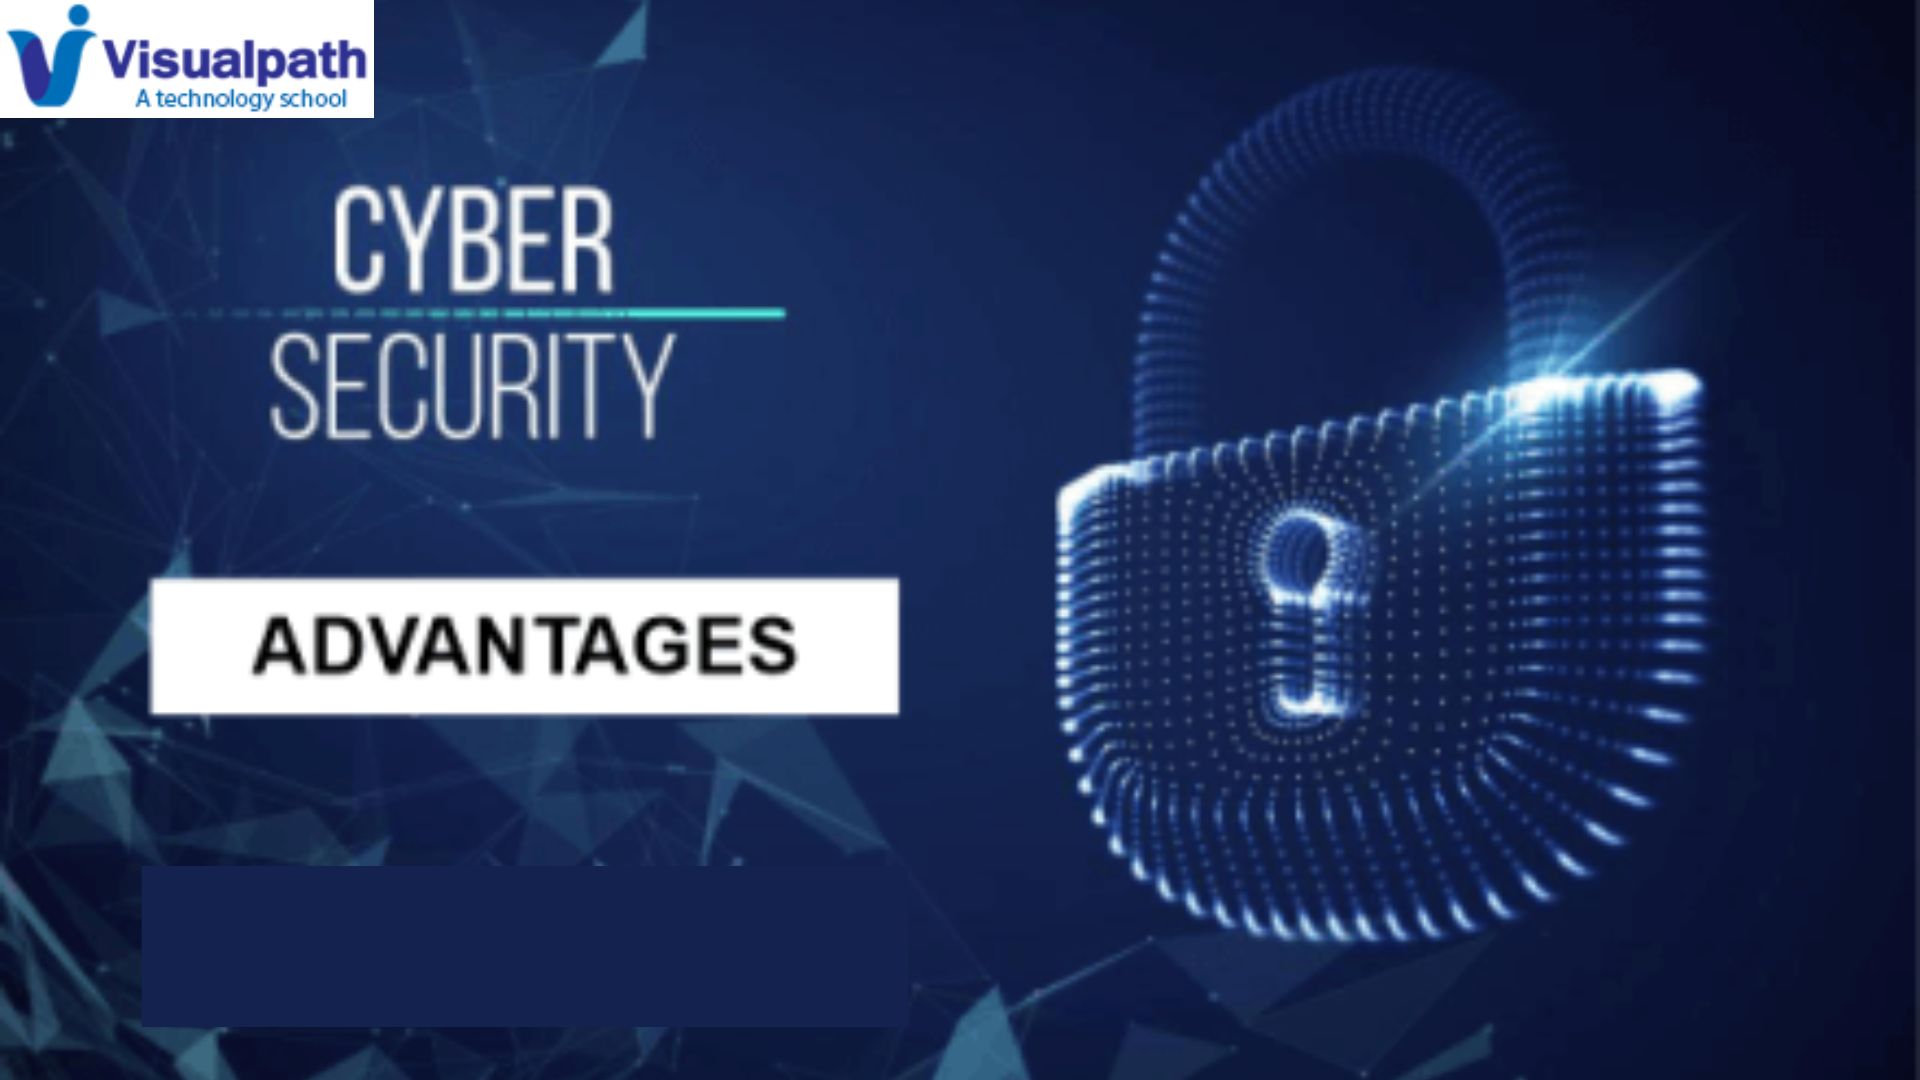 Cyber Security Online Training | Visualpath